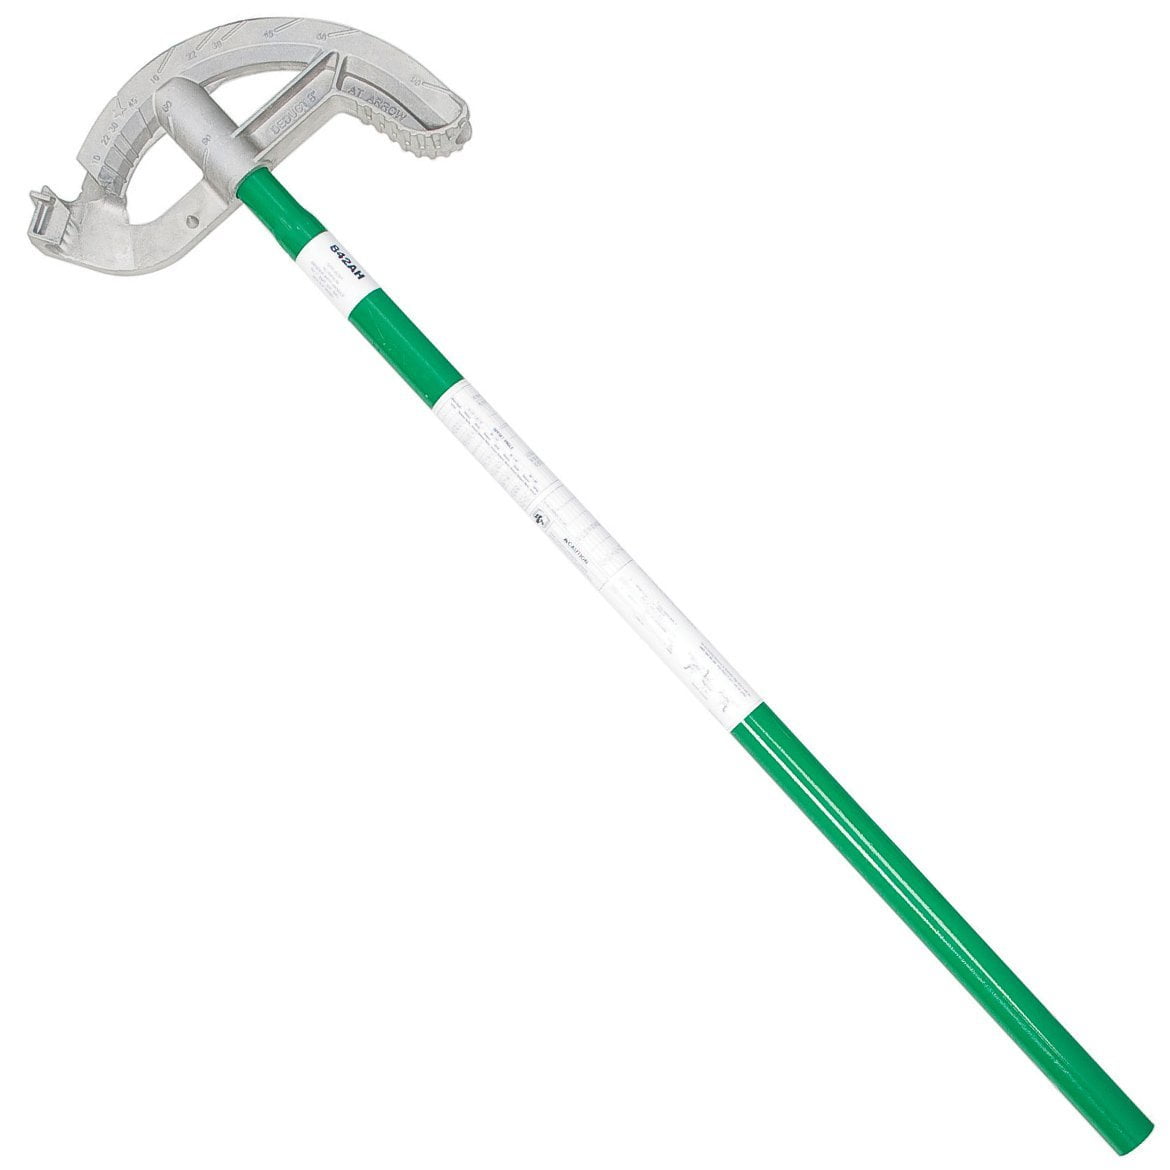 Greenlee 842AH Site Rite Aluminum Hand Bender Head with Handle 1-Inch EMT and 3/4-Inch Rigid